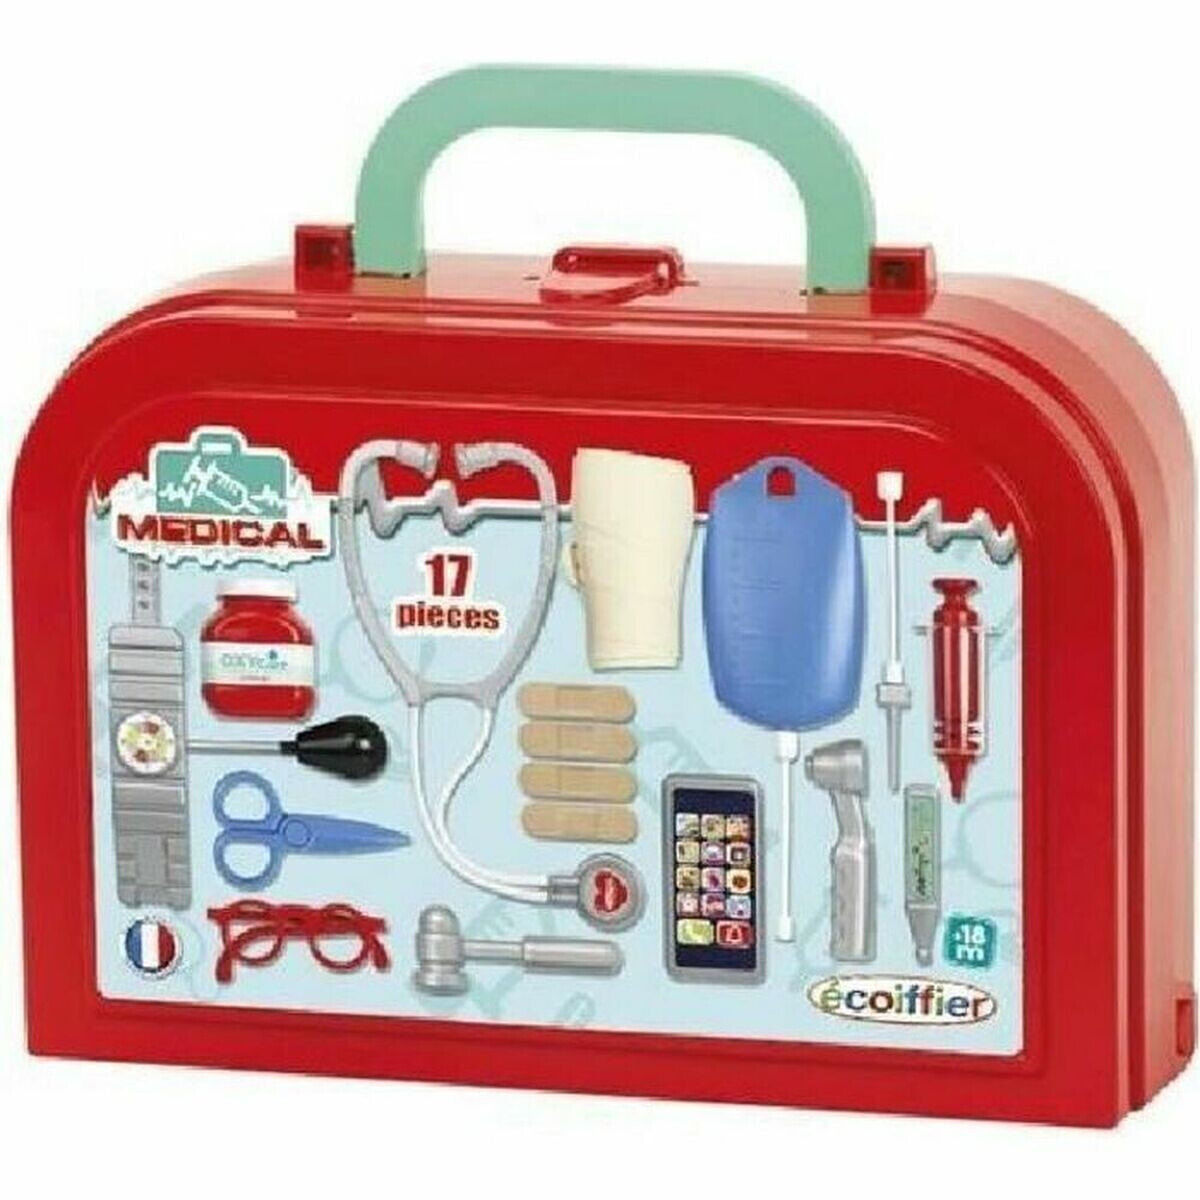 Toy Medical Case with Accessories Ecoiffier MEDICAL